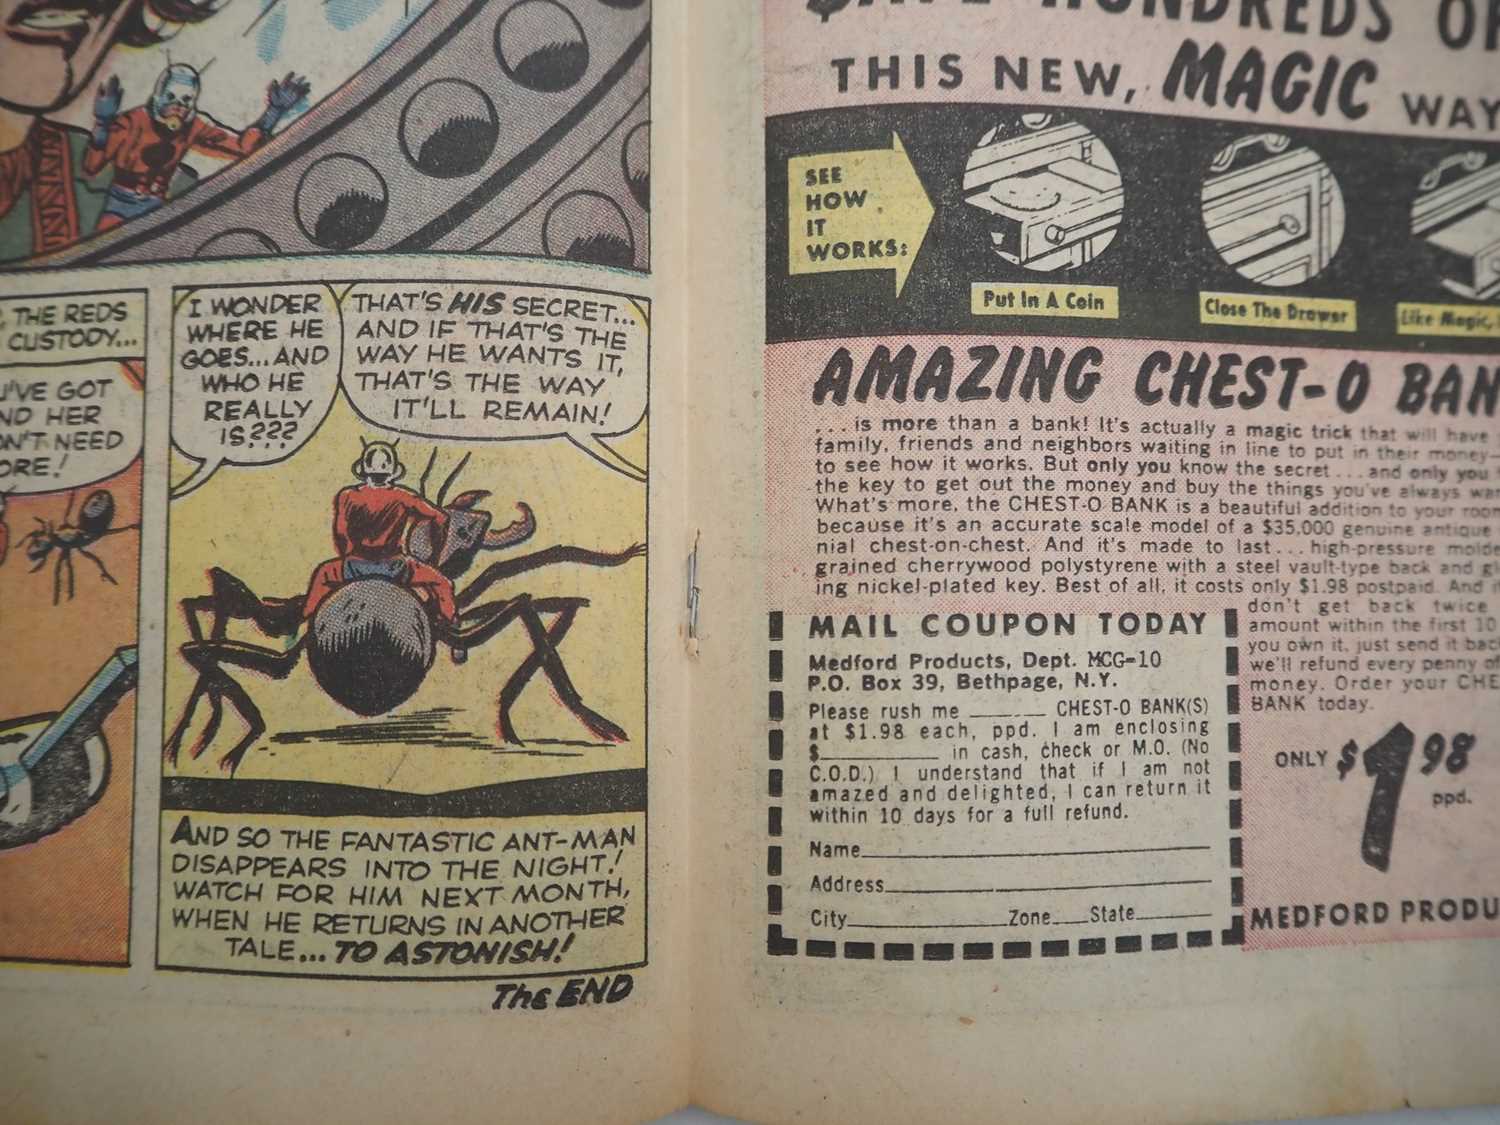 TALES TO ASTONISH #36 (1962 - MARVEL - UK Price Variant) - Includes the second appearance of Ant-Man - Image 7 of 9